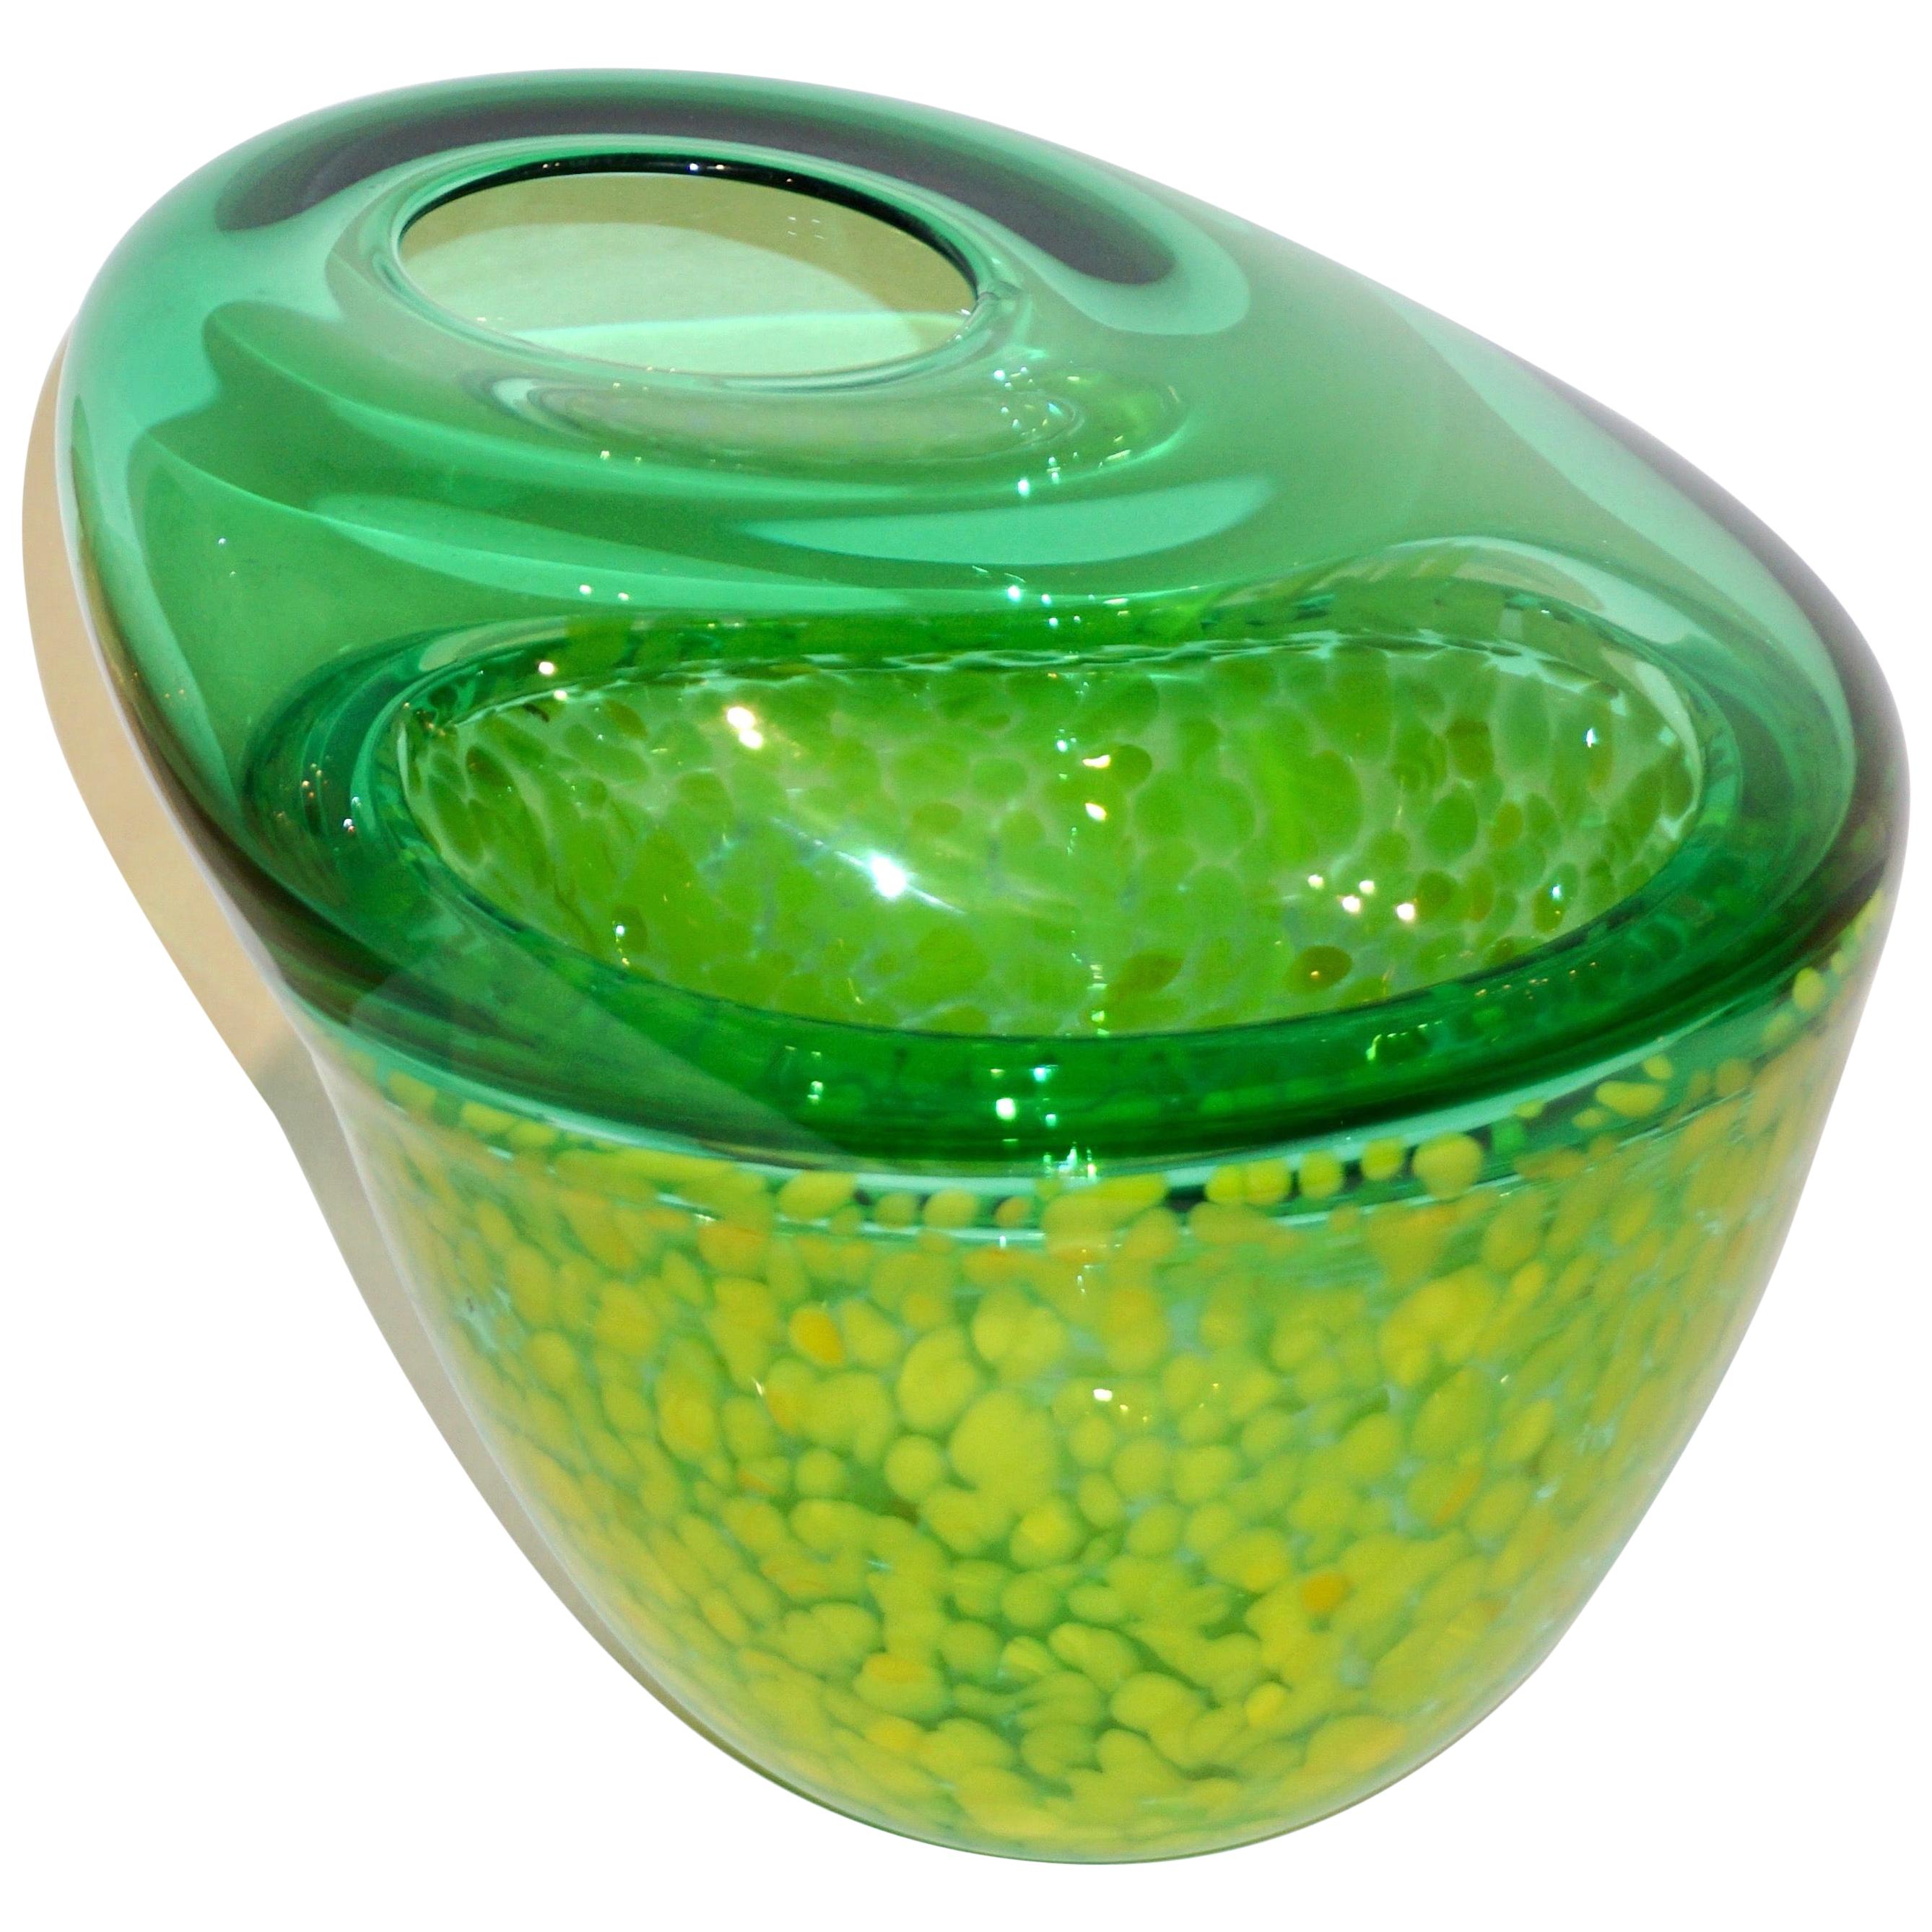 Hilton McConnico by Formia 1990s Italian Green Spotted Murano Art Glass Vase